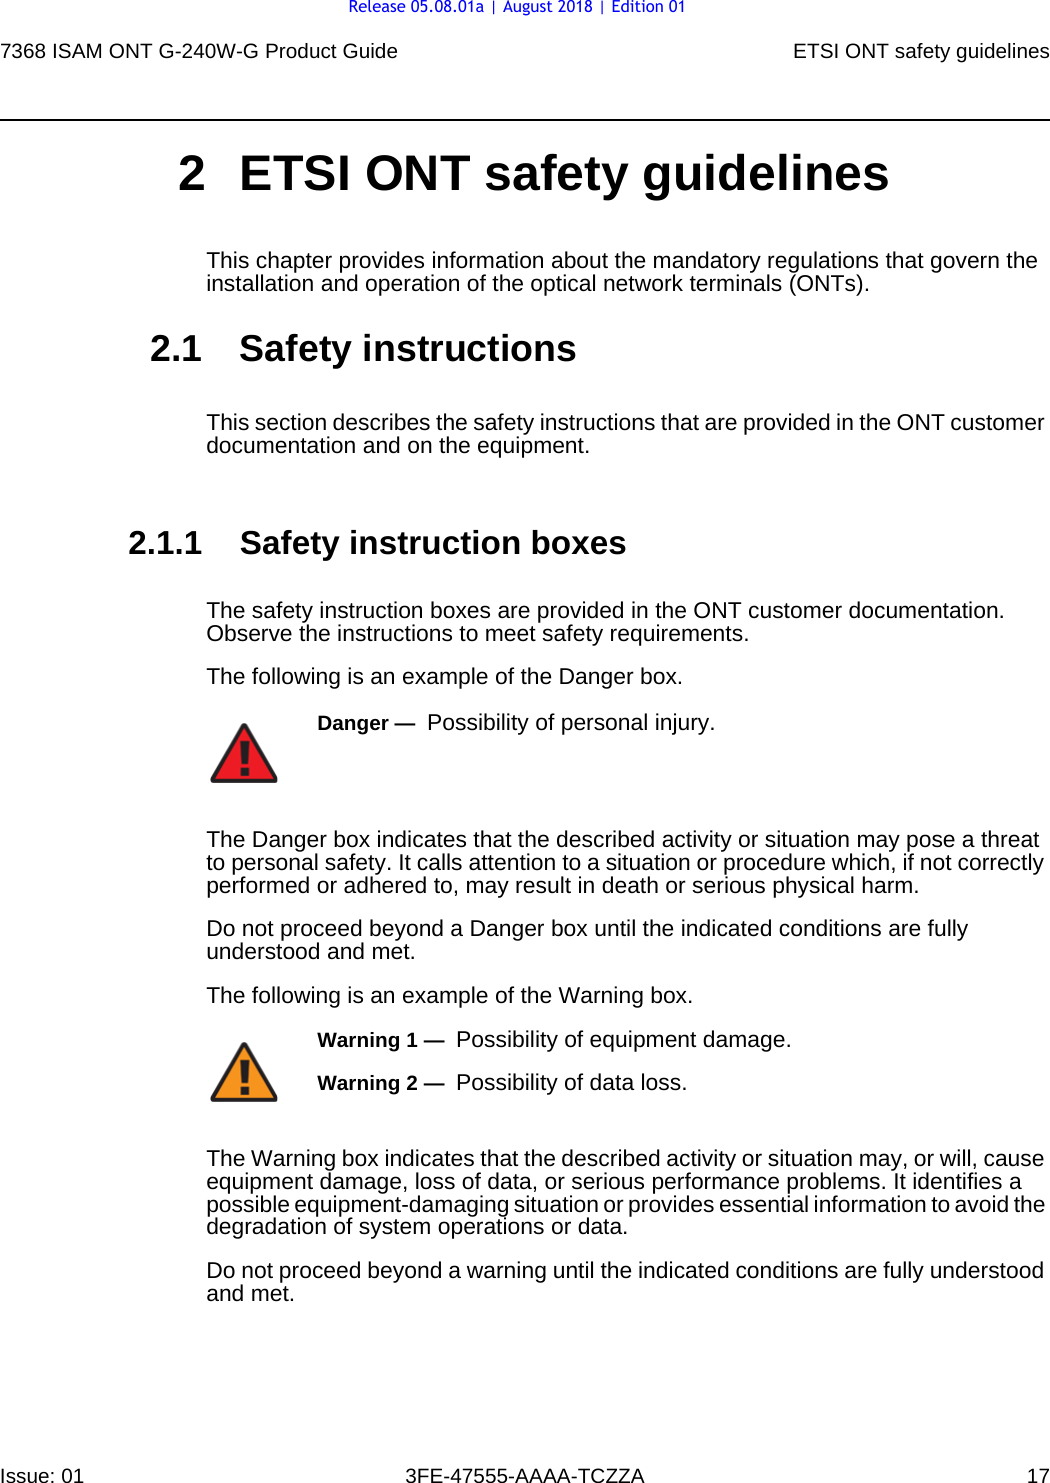 7368 ISAM ONT G-240W-G Product Guide ETSI ONT safety guidelinesIssue: 01 3FE-47555-AAAA-TCZZA 17 2 ETSI ONT safety guidelinesThis chapter provides information about the mandatory regulations that govern the installation and operation of the optical network terminals (ONTs).2.1 Safety instructionsThis section describes the safety instructions that are provided in the ONT customer documentation and on the equipment.2.1.1 Safety instruction boxesThe safety instruction boxes are provided in the ONT customer documentation. Observe the instructions to meet safety requirements.The following is an example of the Danger box.The Danger box indicates that the described activity or situation may pose a threat to personal safety. It calls attention to a situation or procedure which, if not correctly performed or adhered to, may result in death or serious physical harm. Do not proceed beyond a Danger box until the indicated conditions are fully understood and met.The following is an example of the Warning box.The Warning box indicates that the described activity or situation may, or will, cause equipment damage, loss of data, or serious performance problems. It identifies a possible equipment-damaging situation or provides essential information to avoid the degradation of system operations or data.Do not proceed beyond a warning until the indicated conditions are fully understood and met.Danger —  Possibility of personal injury. Warning 1 —  Possibility of equipment damage.Warning 2 —  Possibility of data loss.Release 05.08.01a | August 2018 | Edition 01